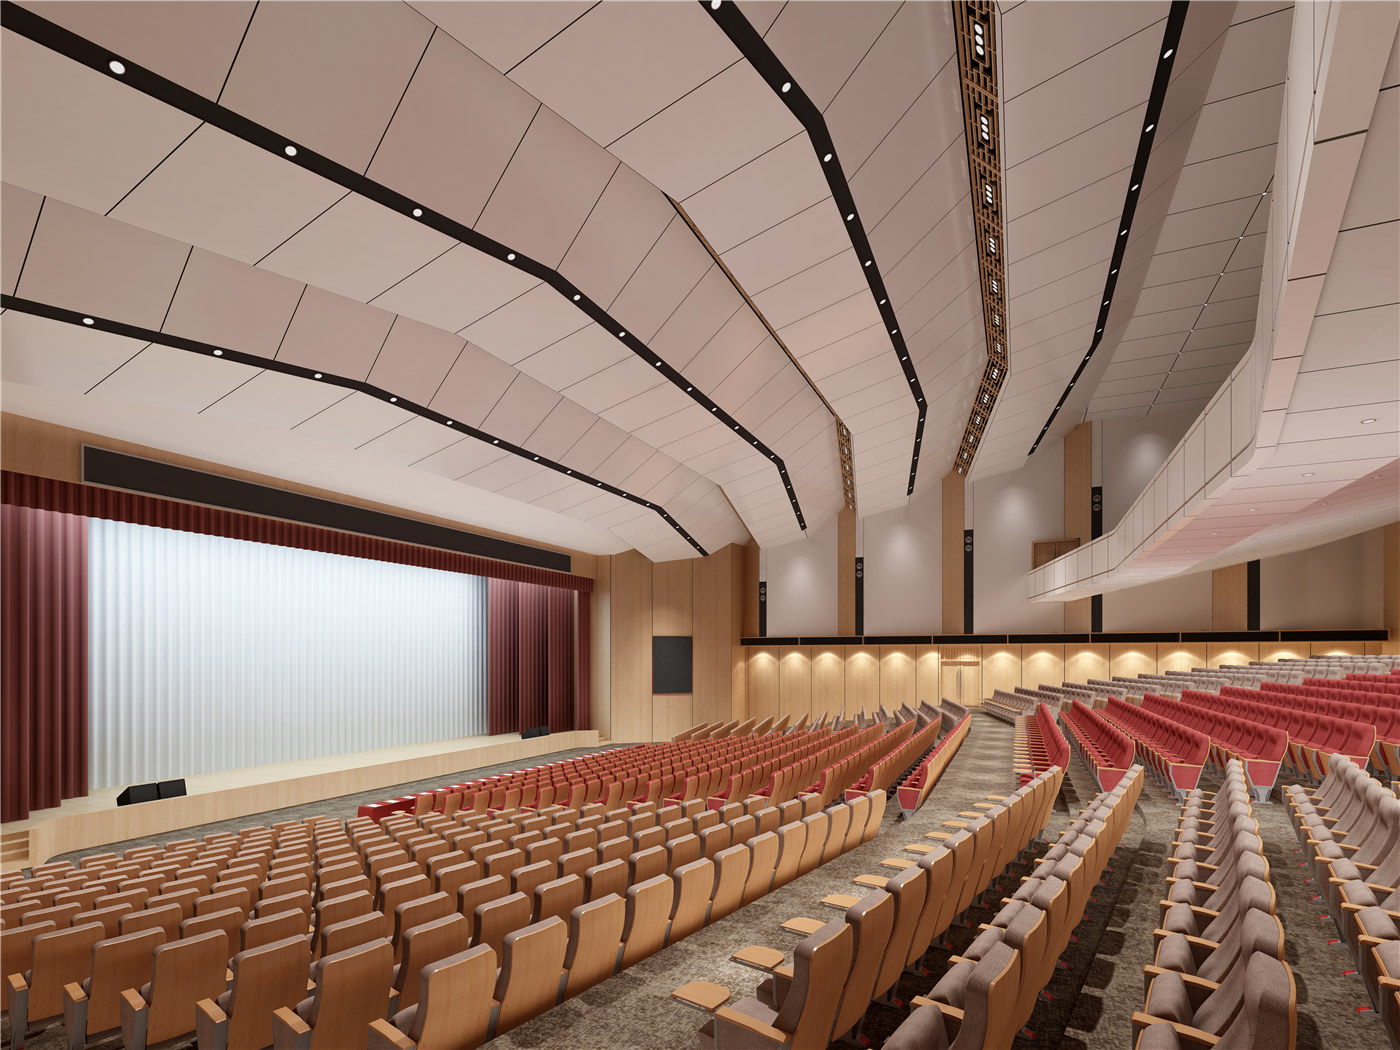 Enhance the Aesthetics of Your Venue with Customizable Auditorium Seating from Reputable Manufacturers02